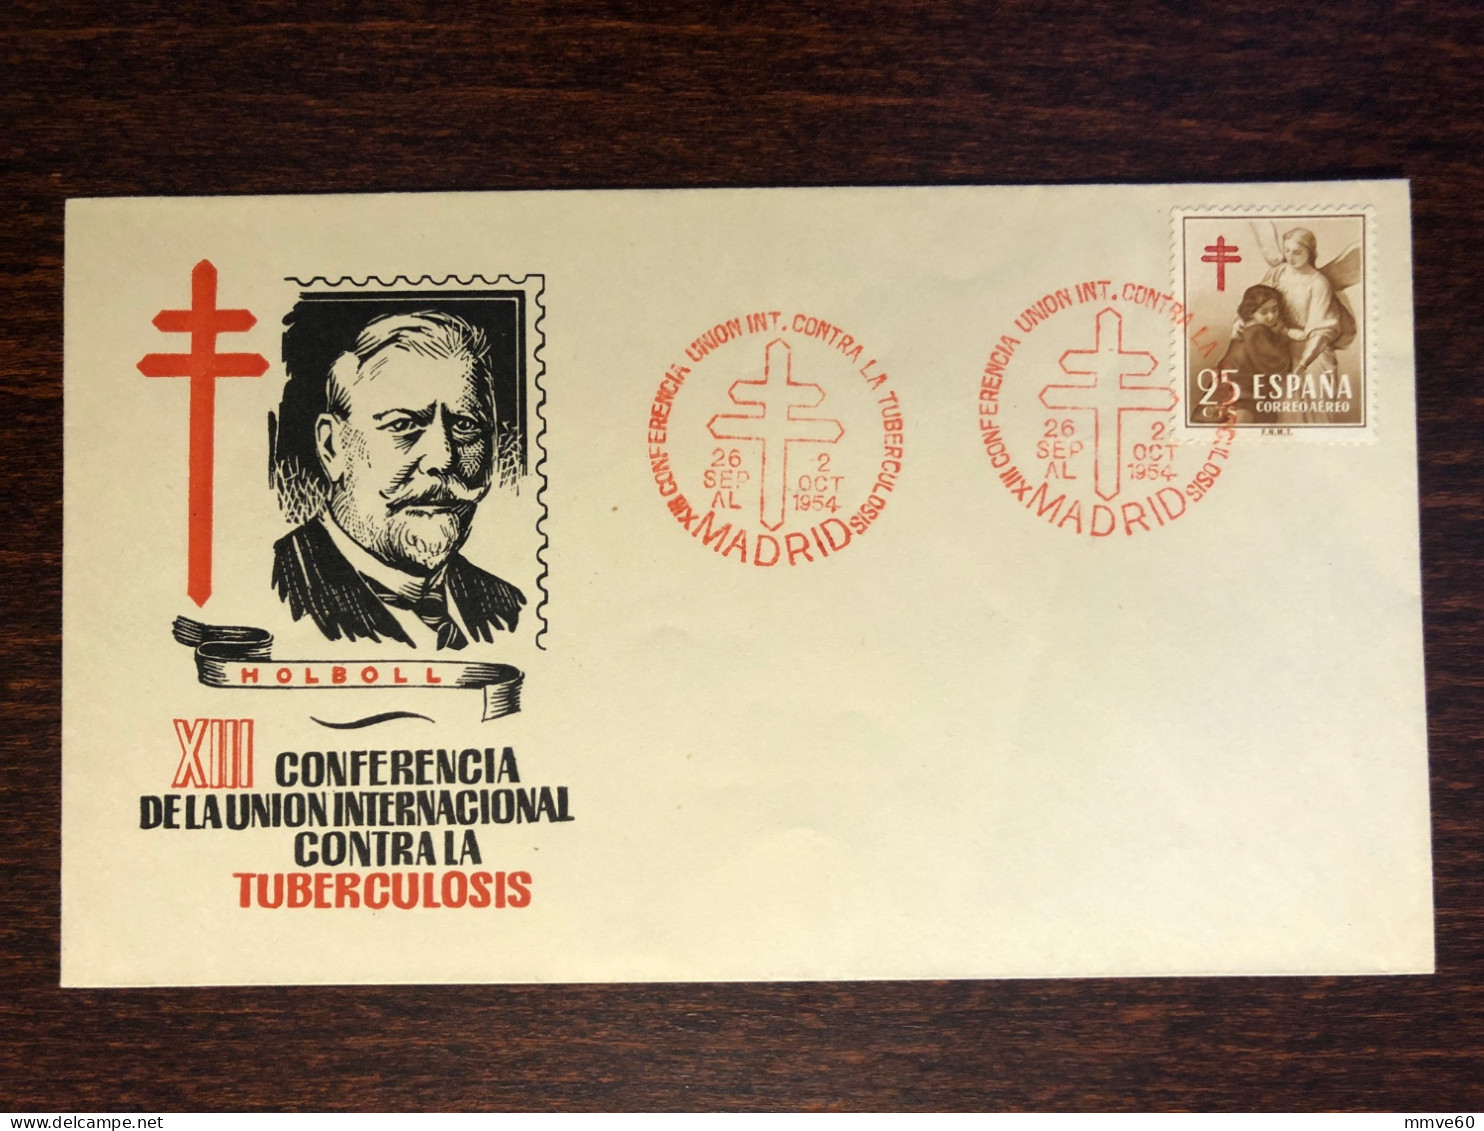 SPAIN FDC COVER 1954 YEAR TUBERCULOSIS TBC HEALTH MEDICINE STAMPS - FDC